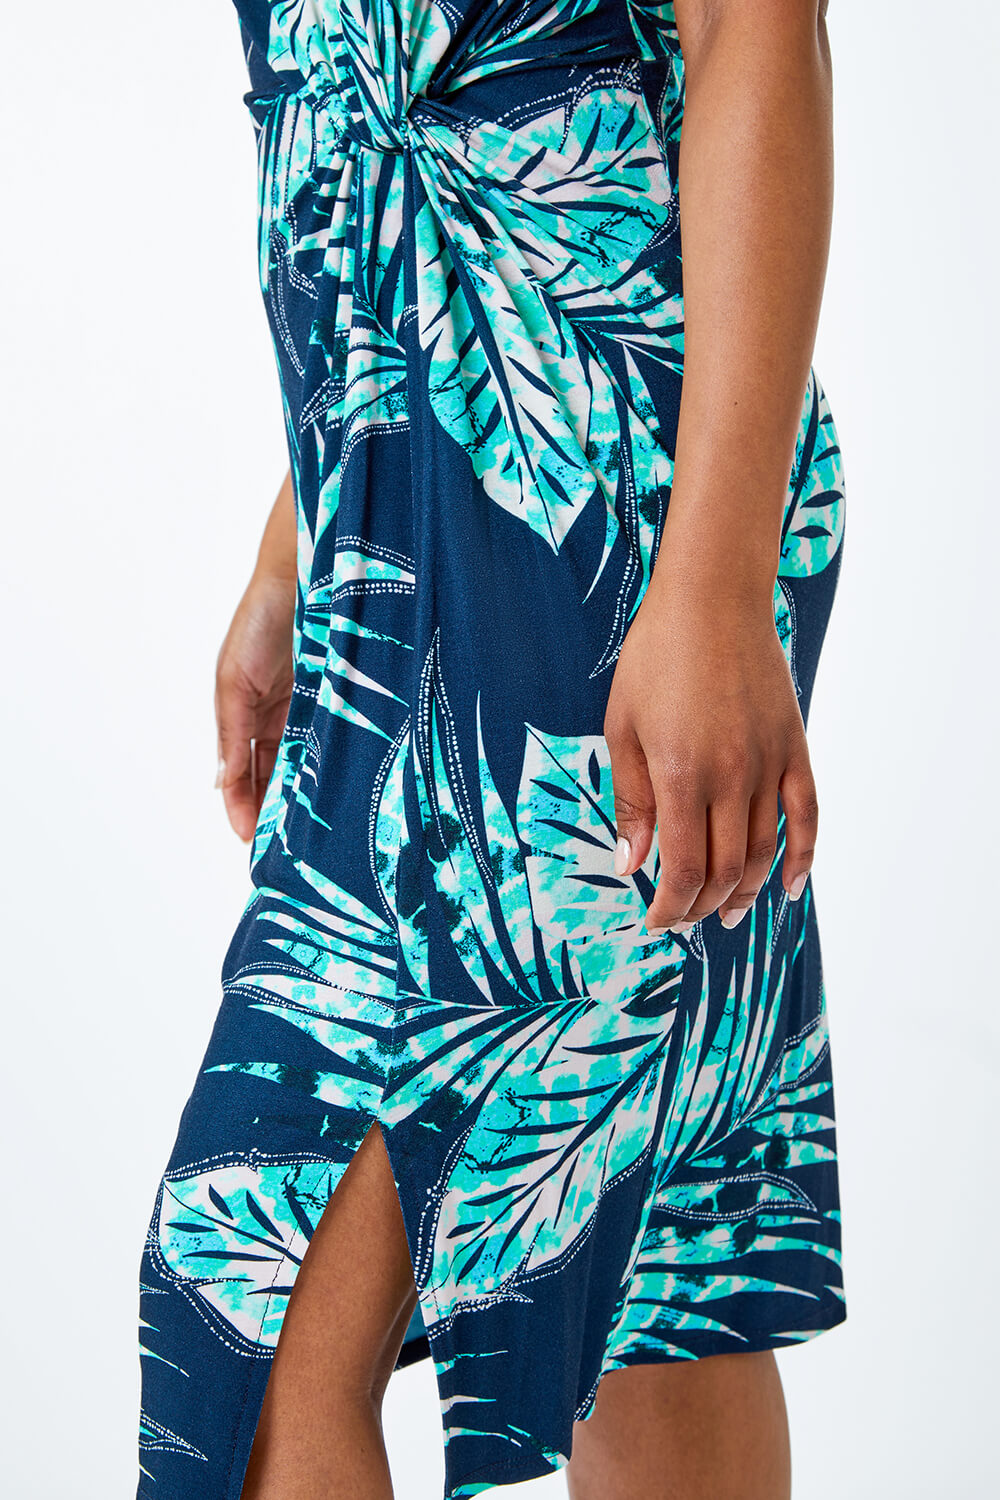 Blue Petite Tropical Twist Waist Ruched Dress, Image 5 of 5